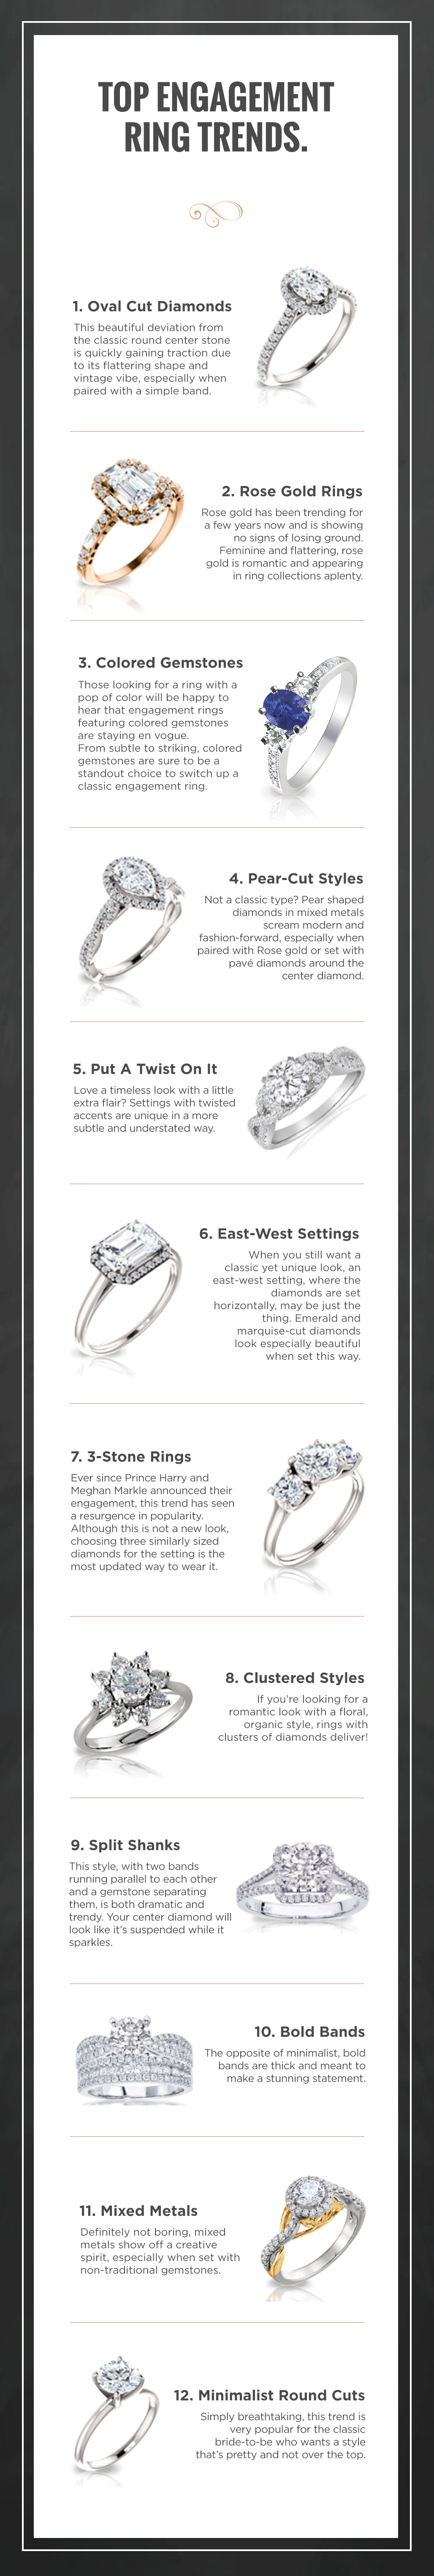 Top Engagement Ring Trends